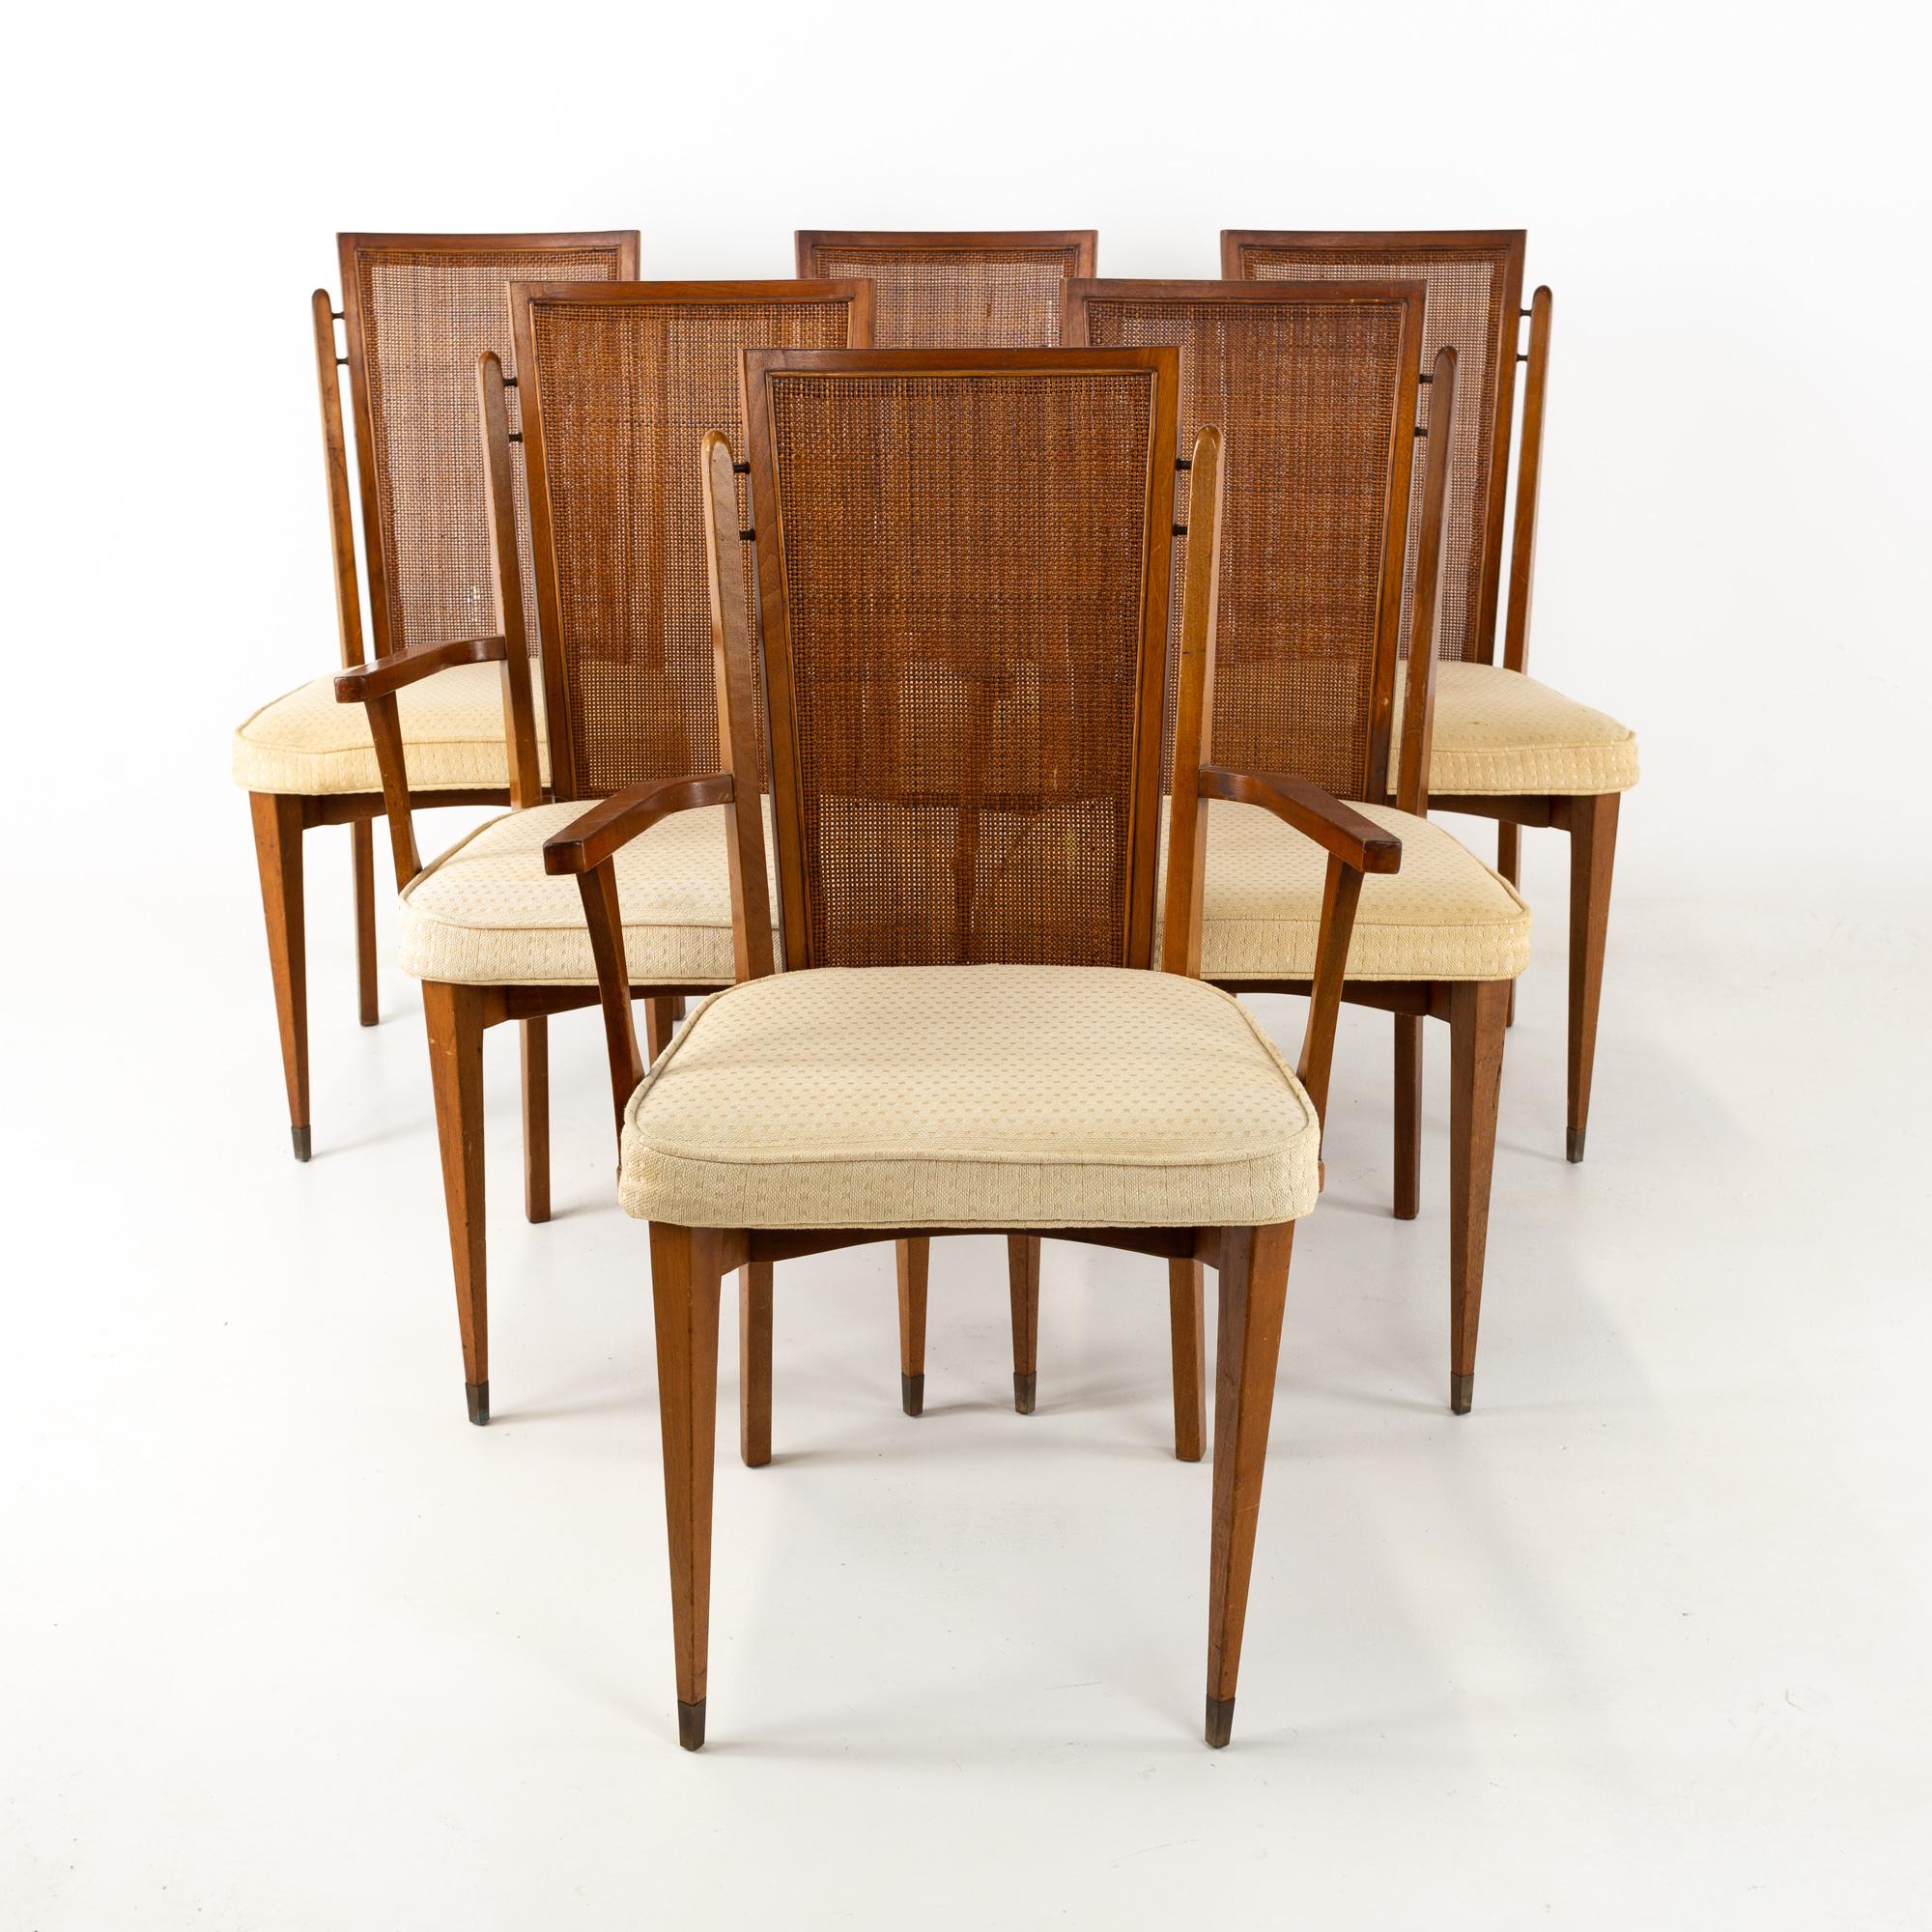 American of Martinsville Mid Century walnut and cane high back dining chairs, set of 6
These chairs are 21 wide x 20 deep x 37 inches high, with a seat height of 19 and arm height of 25.5 inches

All pieces of furniture can be had in what we call